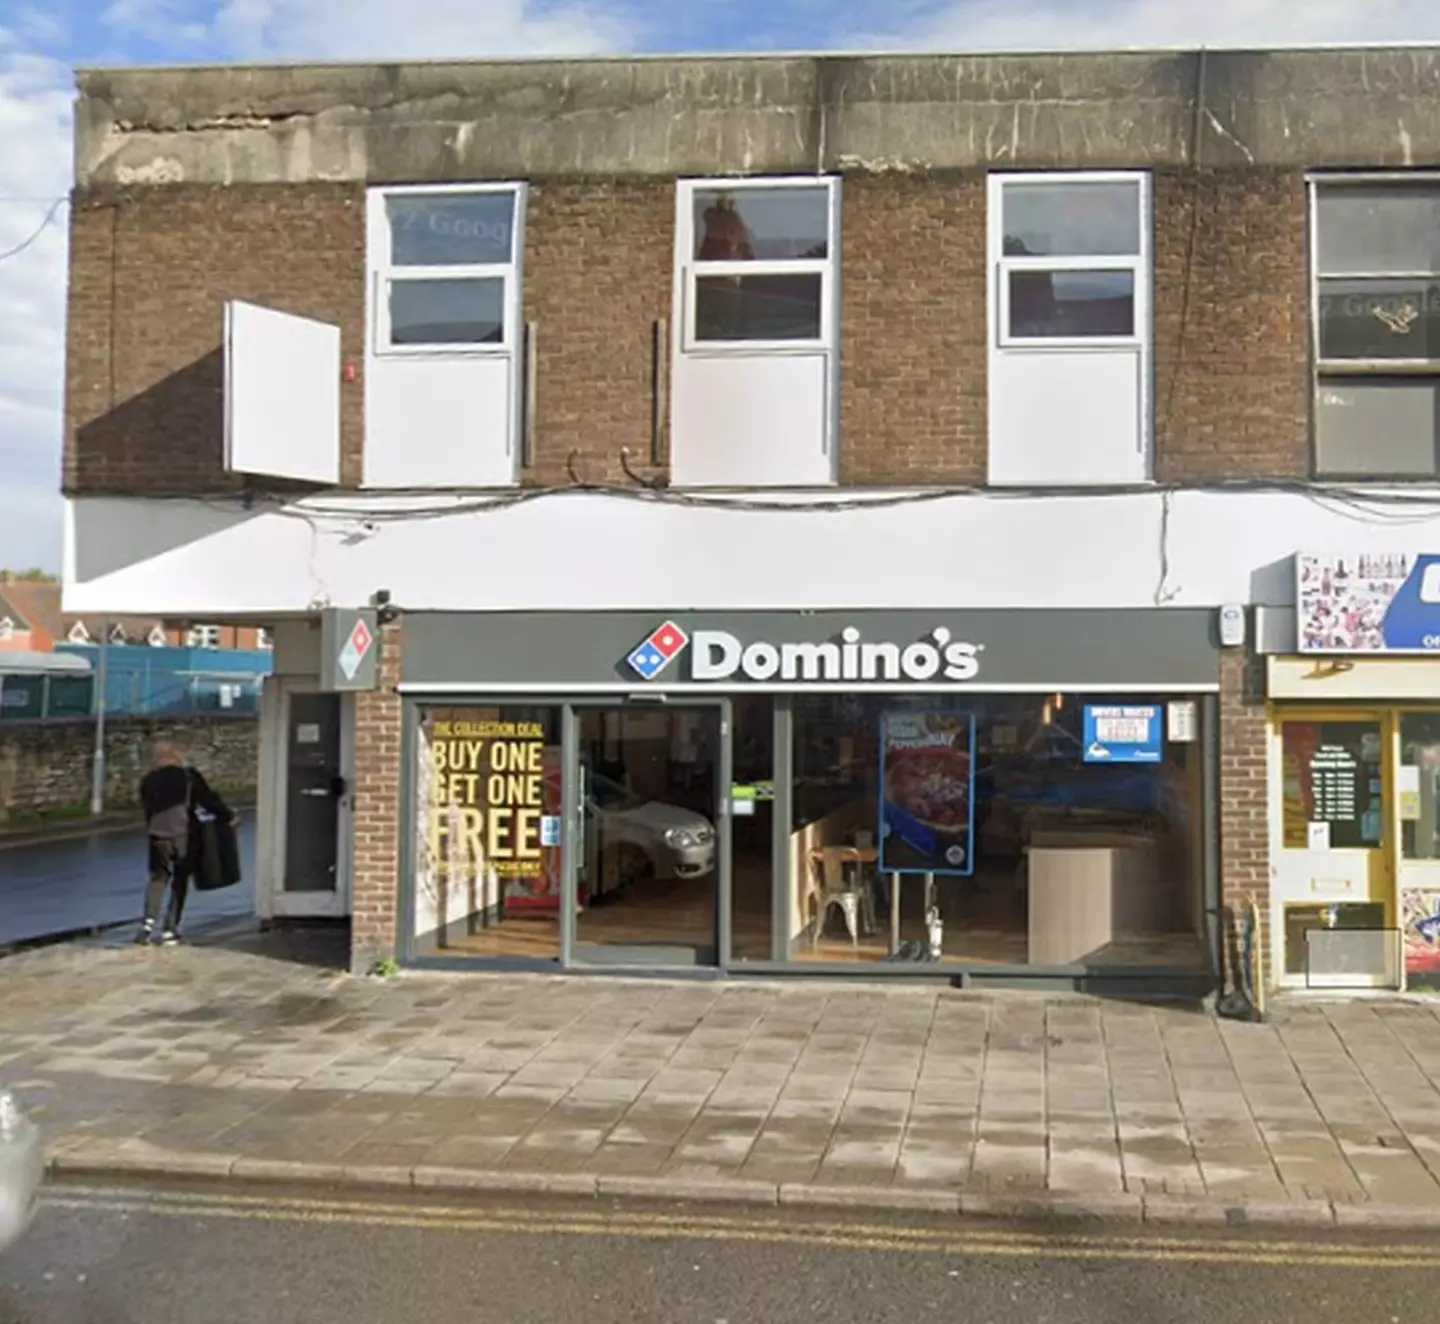 Kellie has since claimed she 'won't order' from Domino's again following the incident.